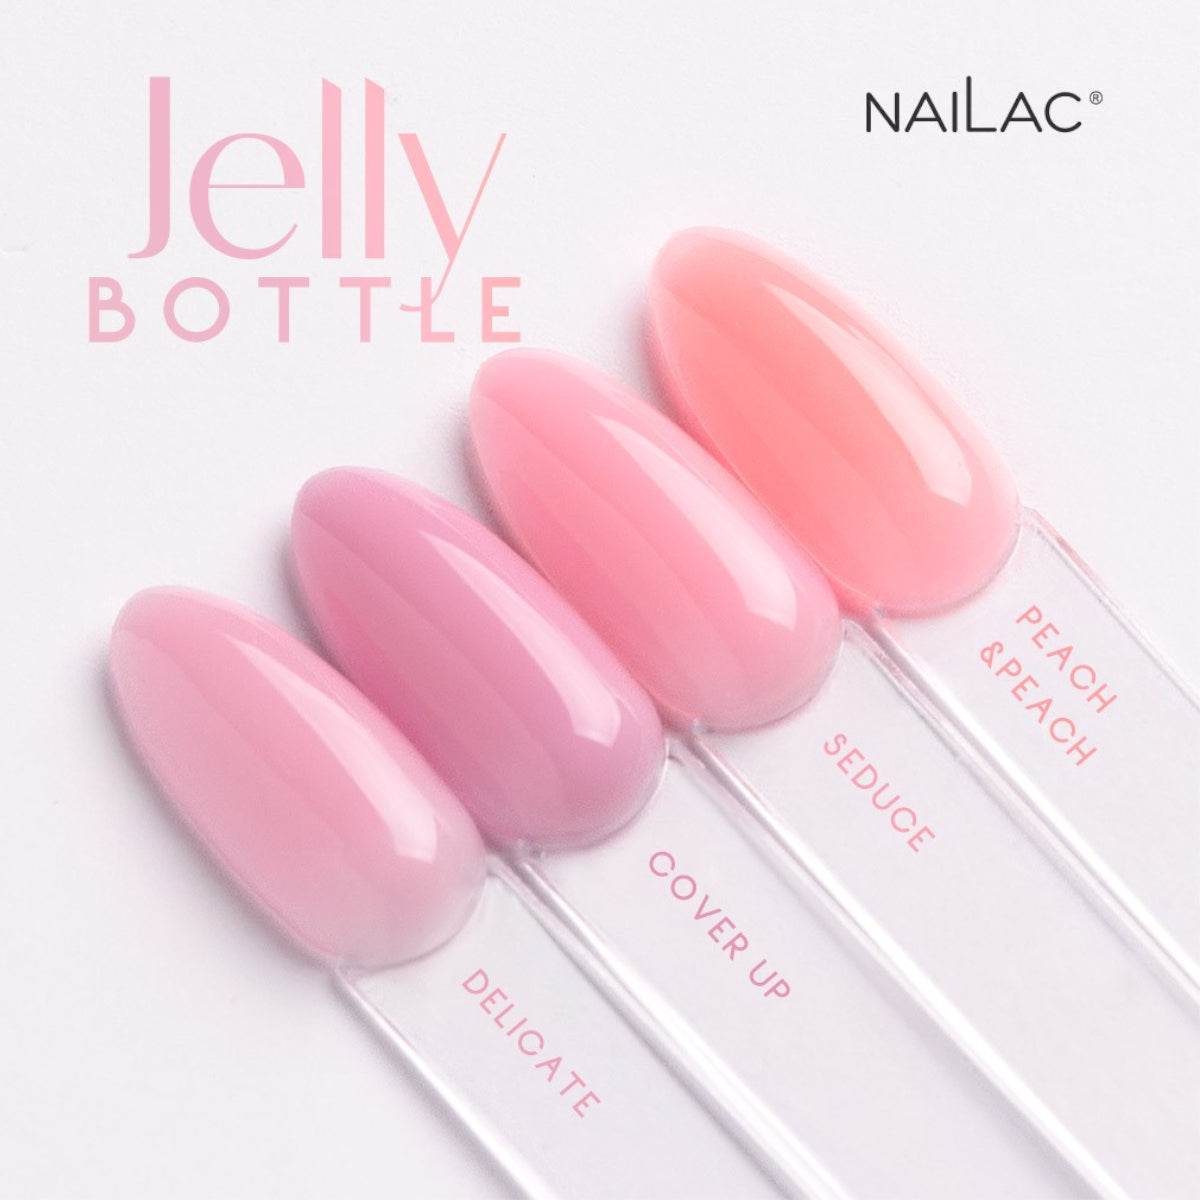 Nailac Jelly Bottle Gel Peach&Peach Nails Collection